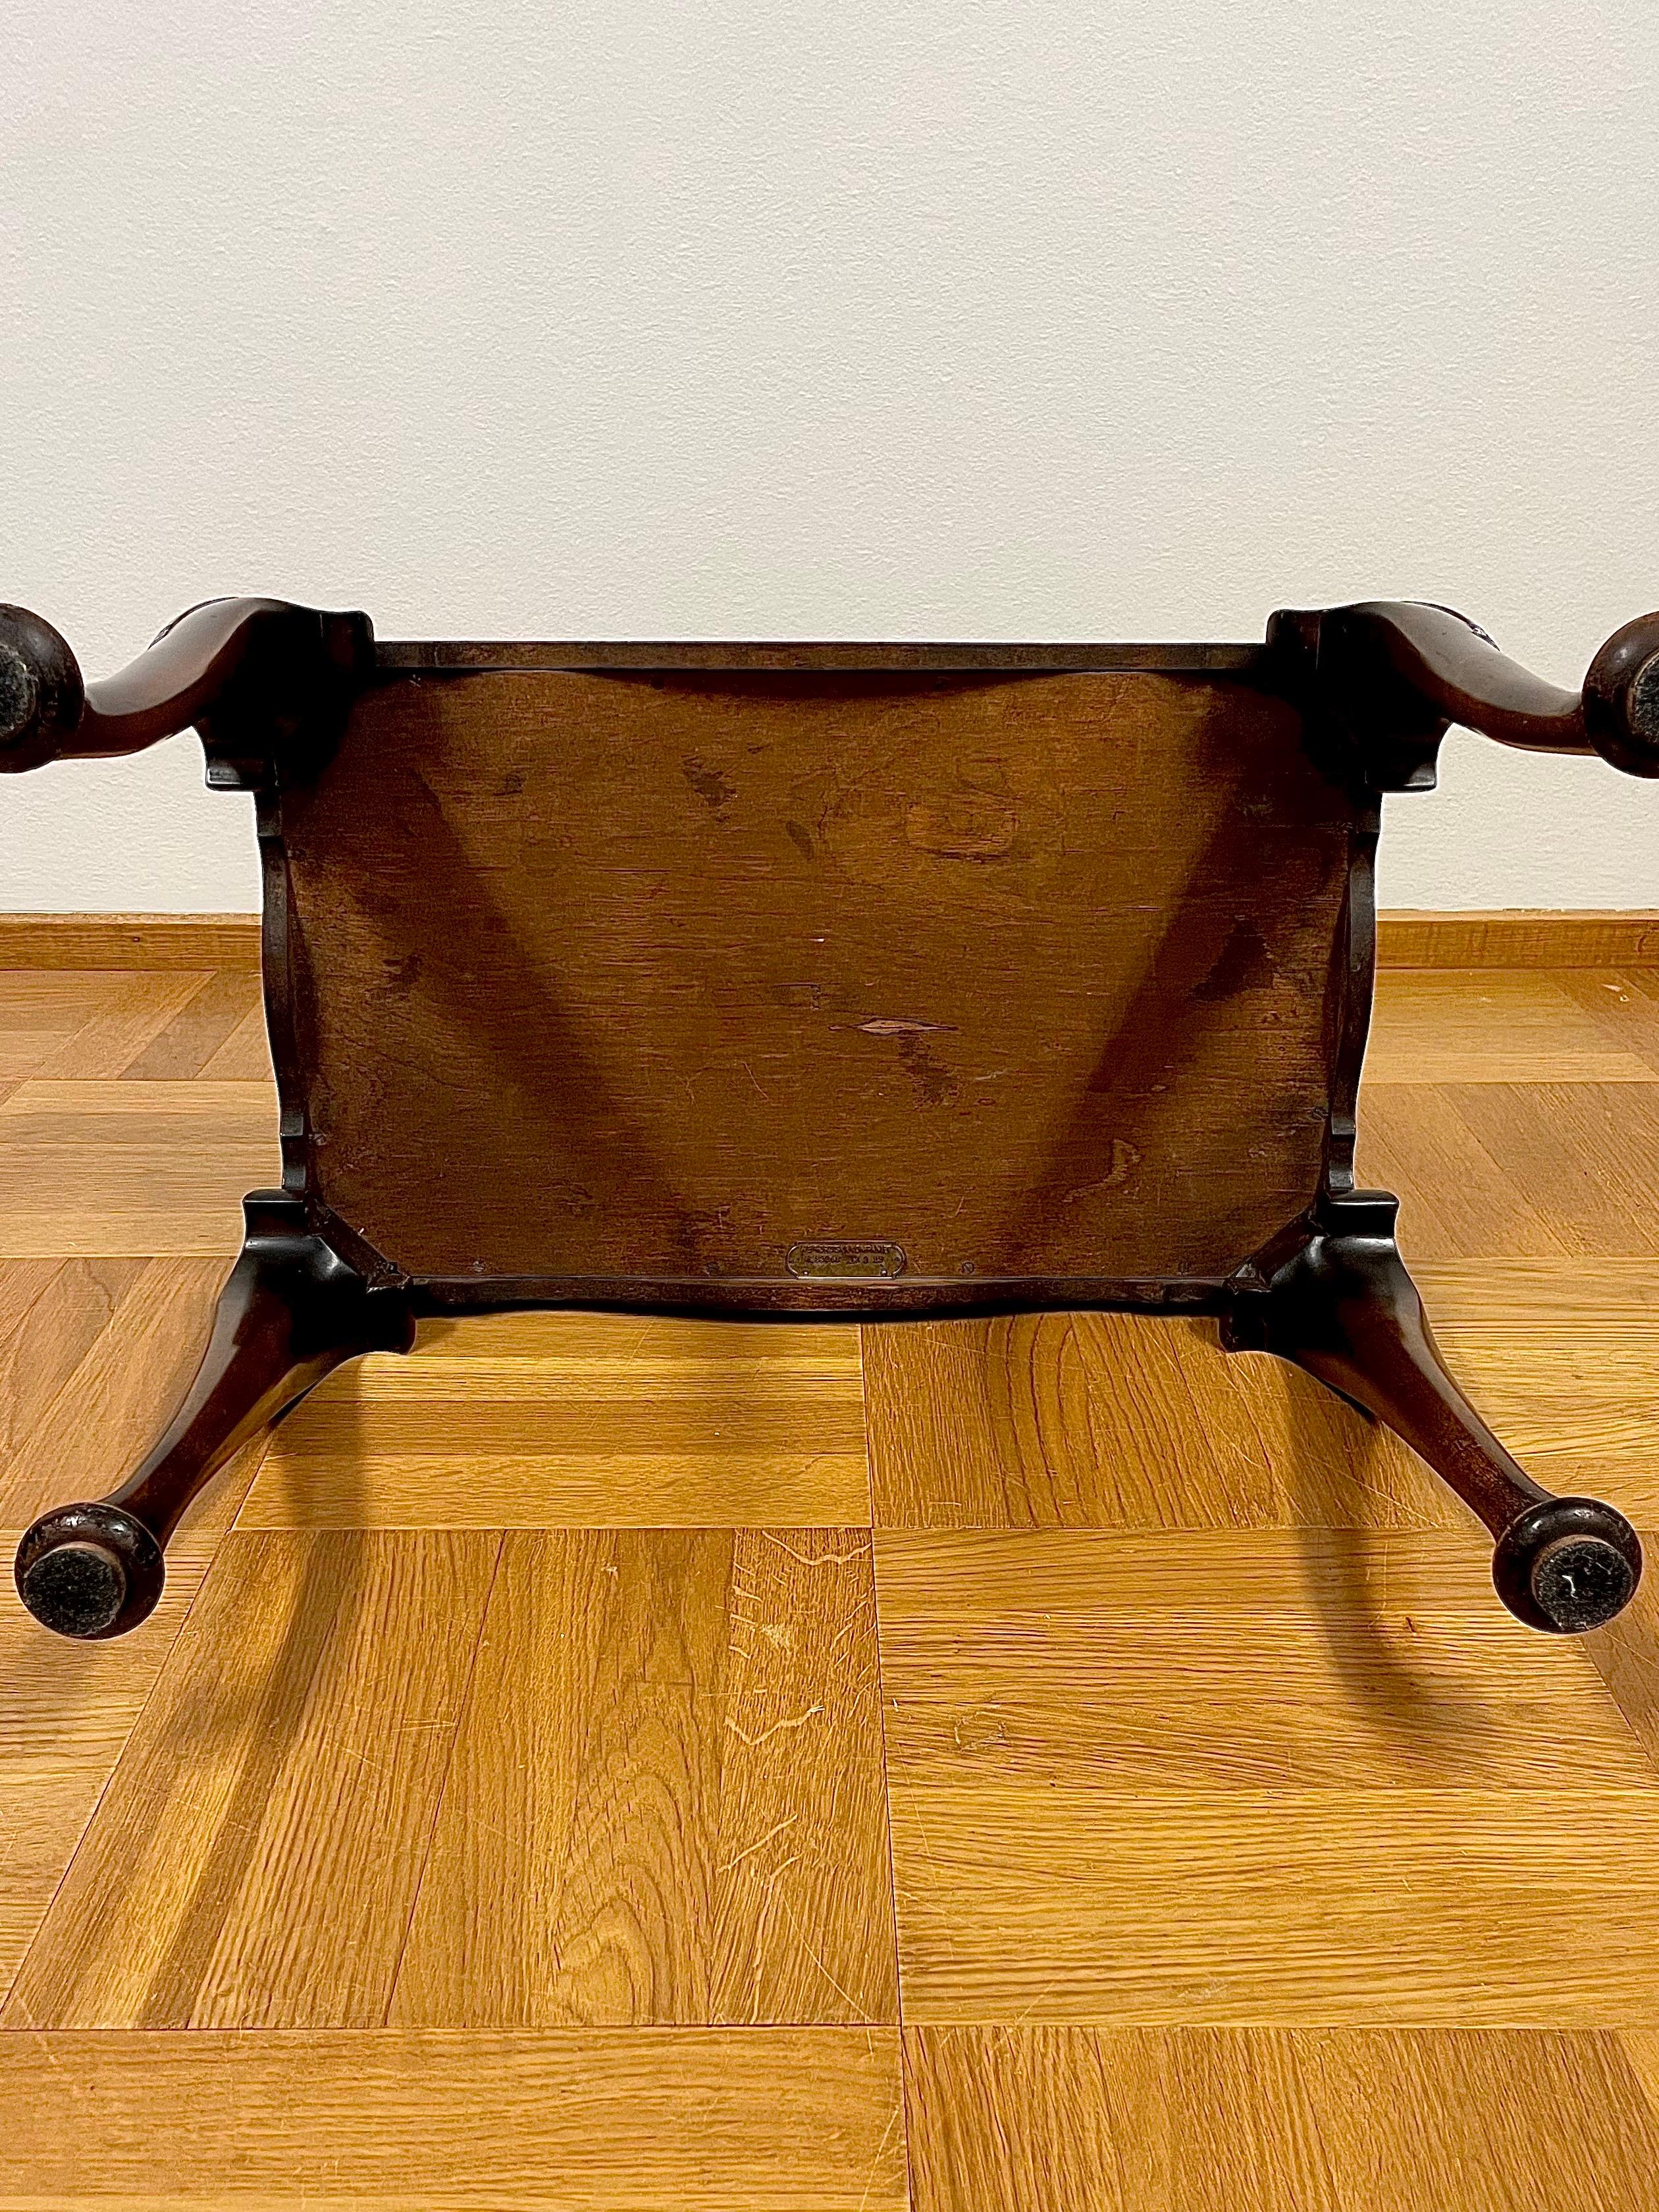 Swedish Tray Table in Stained Birch Manufactured 13/3 1929 by Nordiska Kompaniet For Sale 9